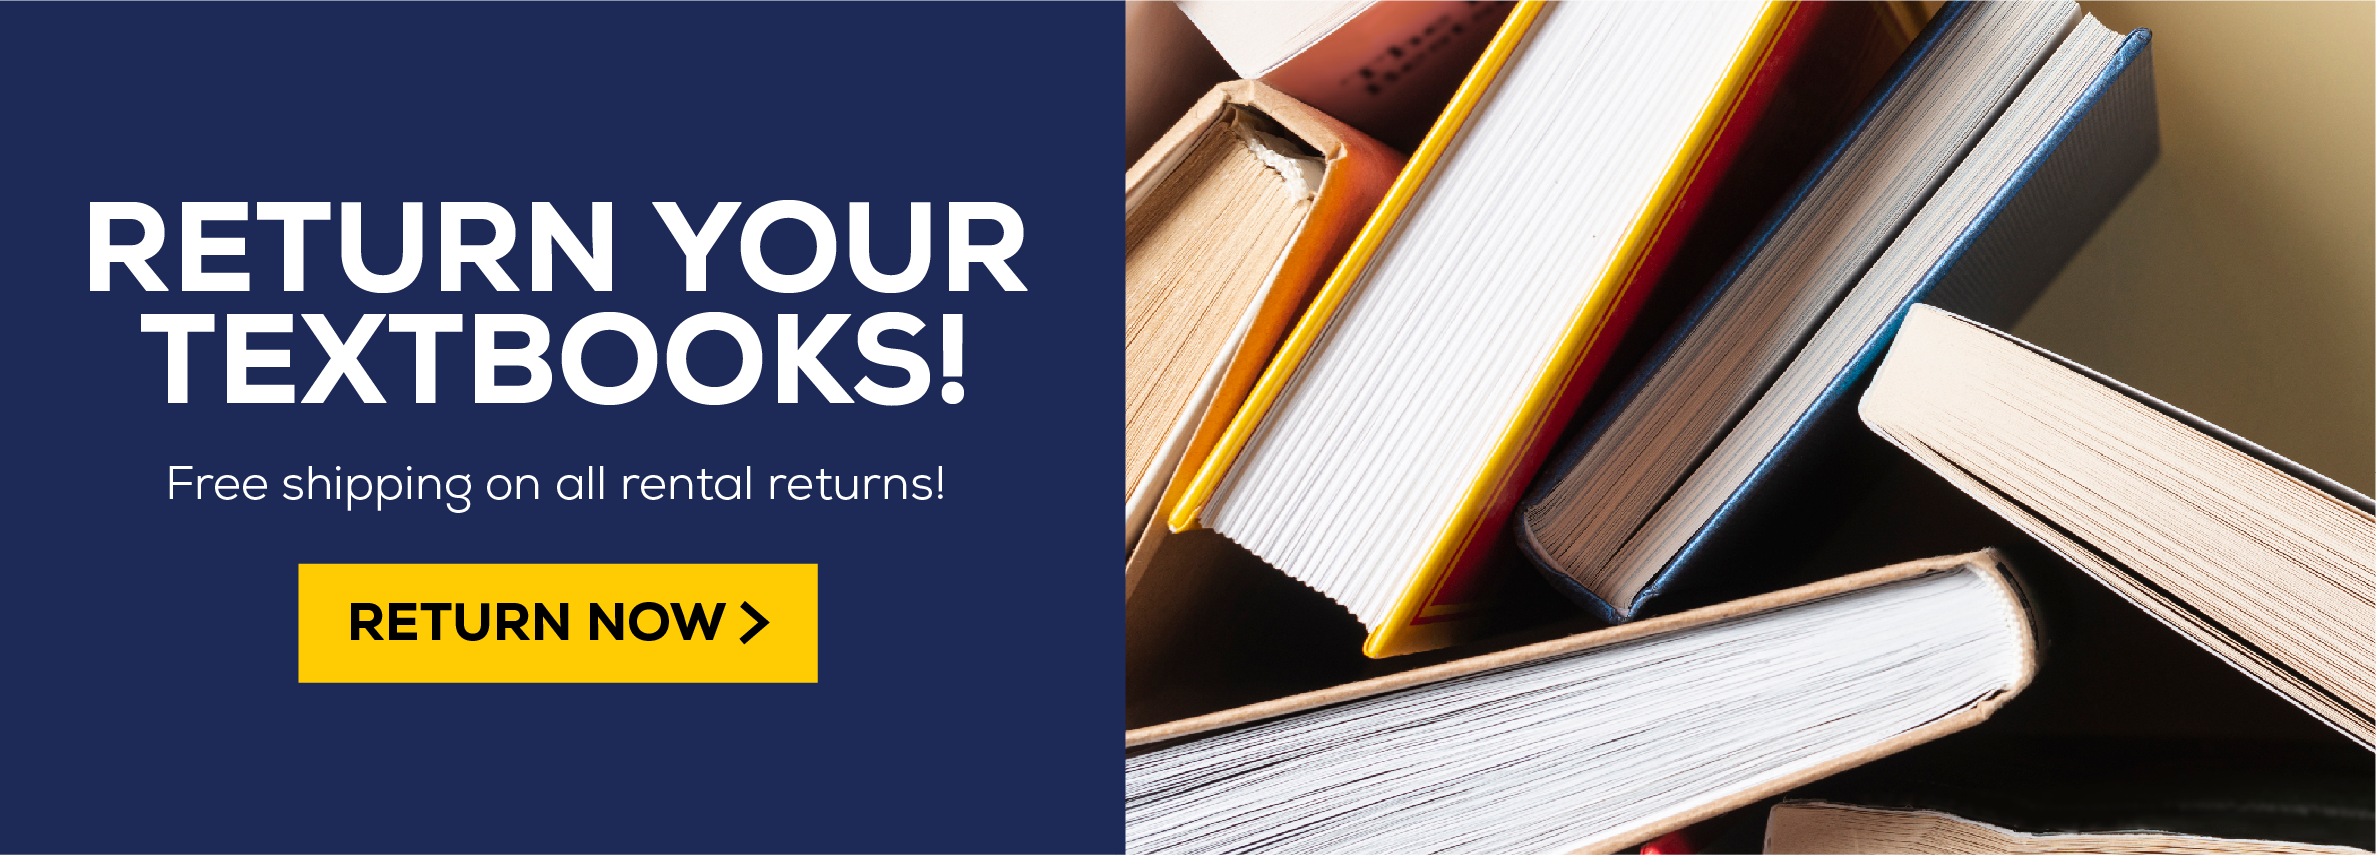 Return your rentals! Free shipping on all rental returns! Return Now.